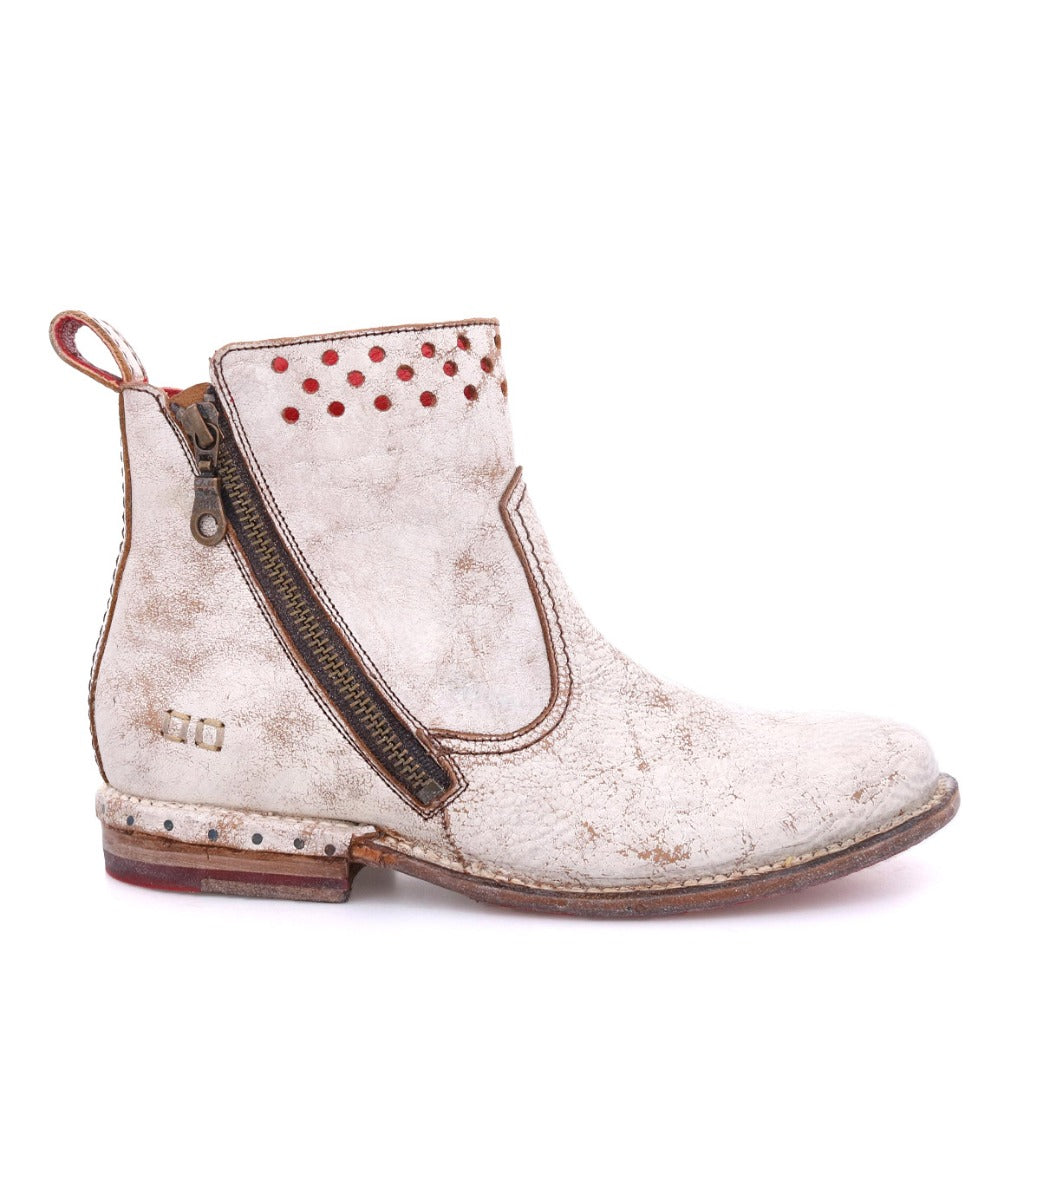 A women's Lotus ankle boot with red studs from Bed Stu.